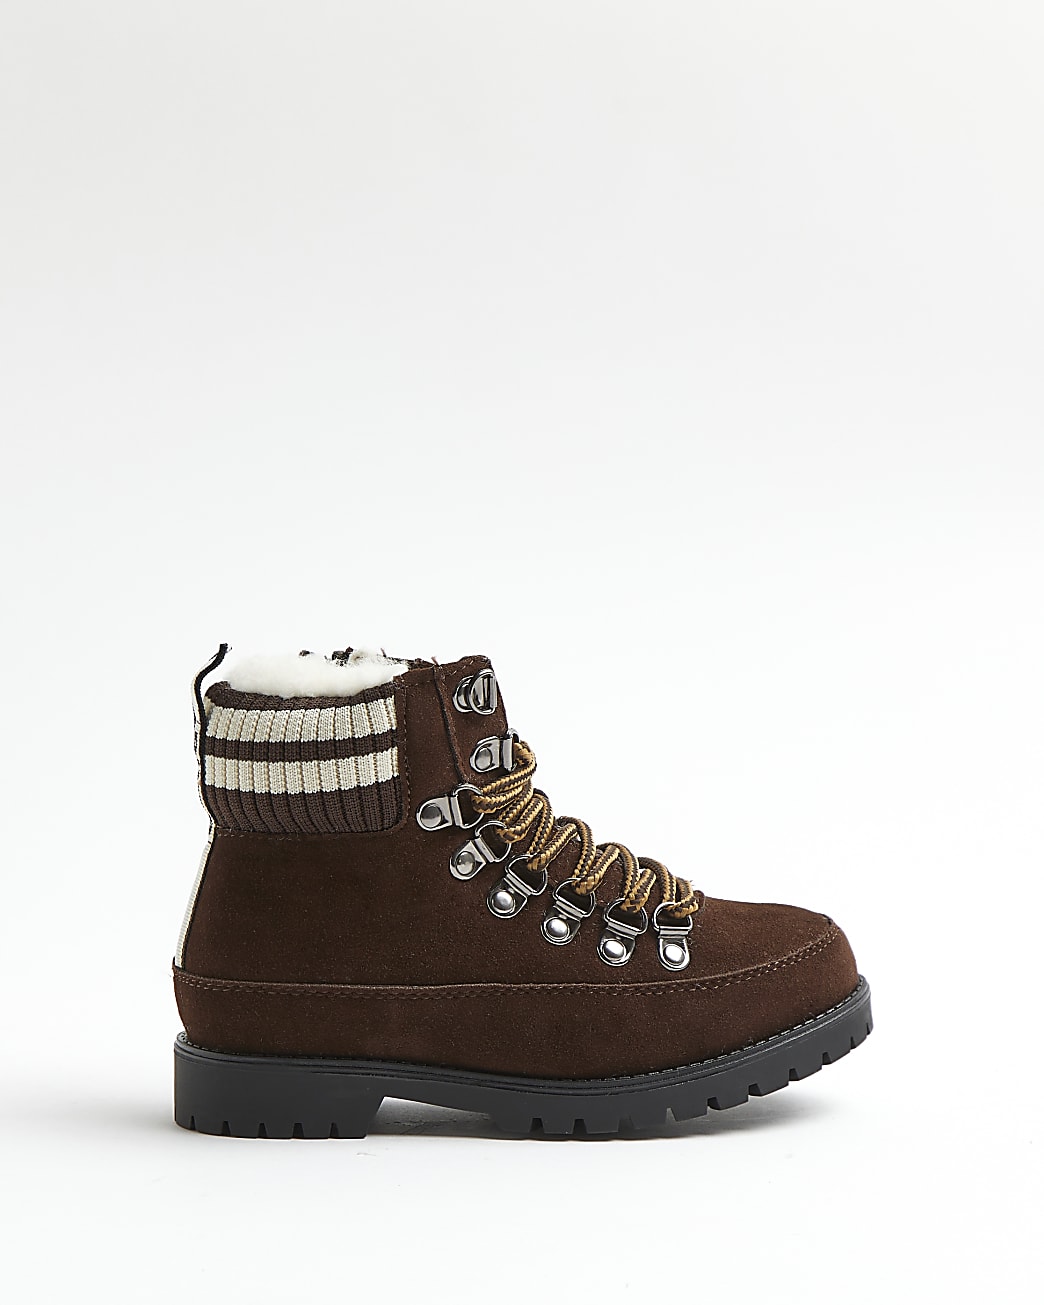 Boys brown knit hiker boots